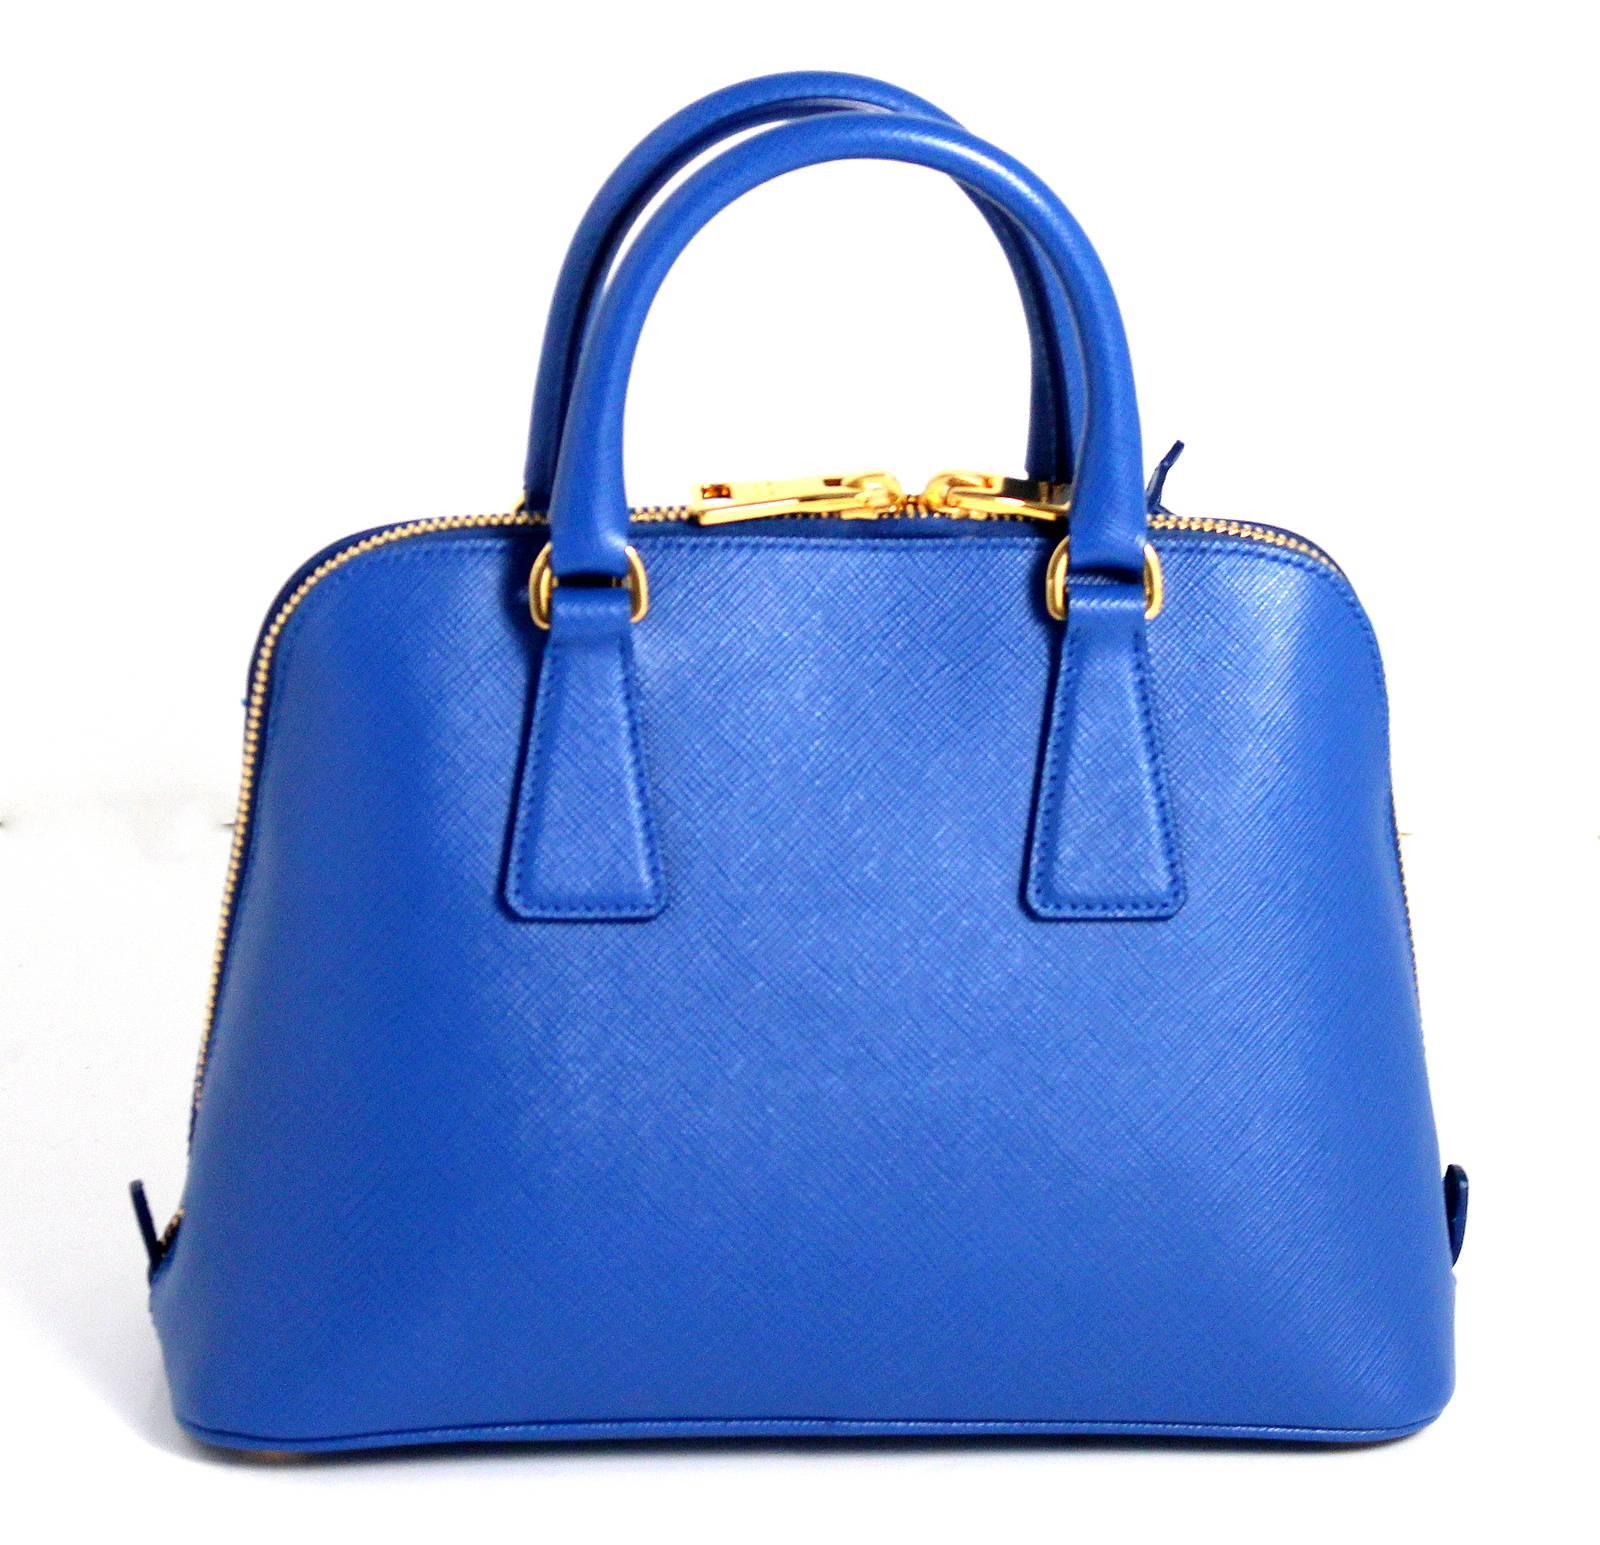 Prada Cobalt Blue Saffiano Lux Promenade Mini- Retail price $1,990.00
 Nearly PRISTINE; perhaps carried once or twice. 
In vivid cobalt blue color known as Azzuro with gold hardware.  The style is a current classic but totally sold out in Azzuro.